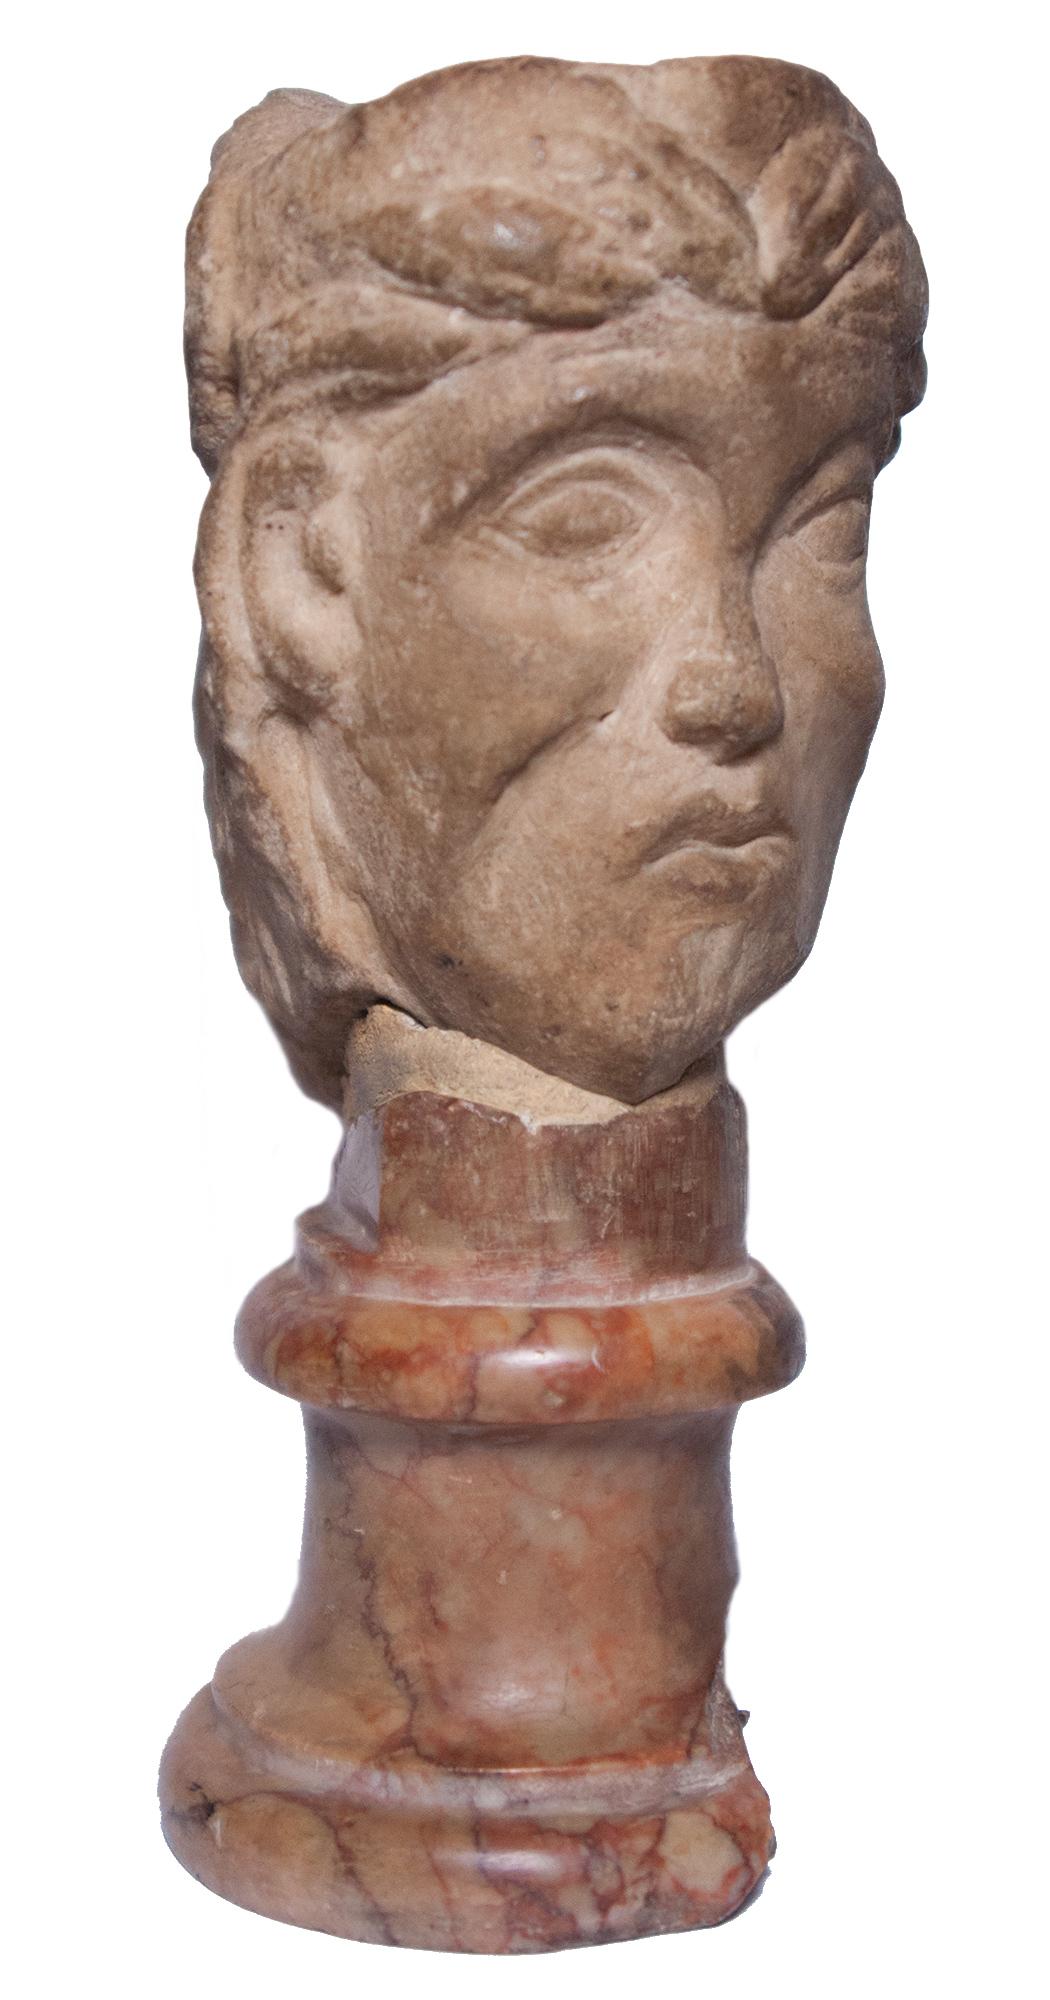 Janiform marble head, Italy, 12th-13th century - Brown Figurative Sculpture by Unknown